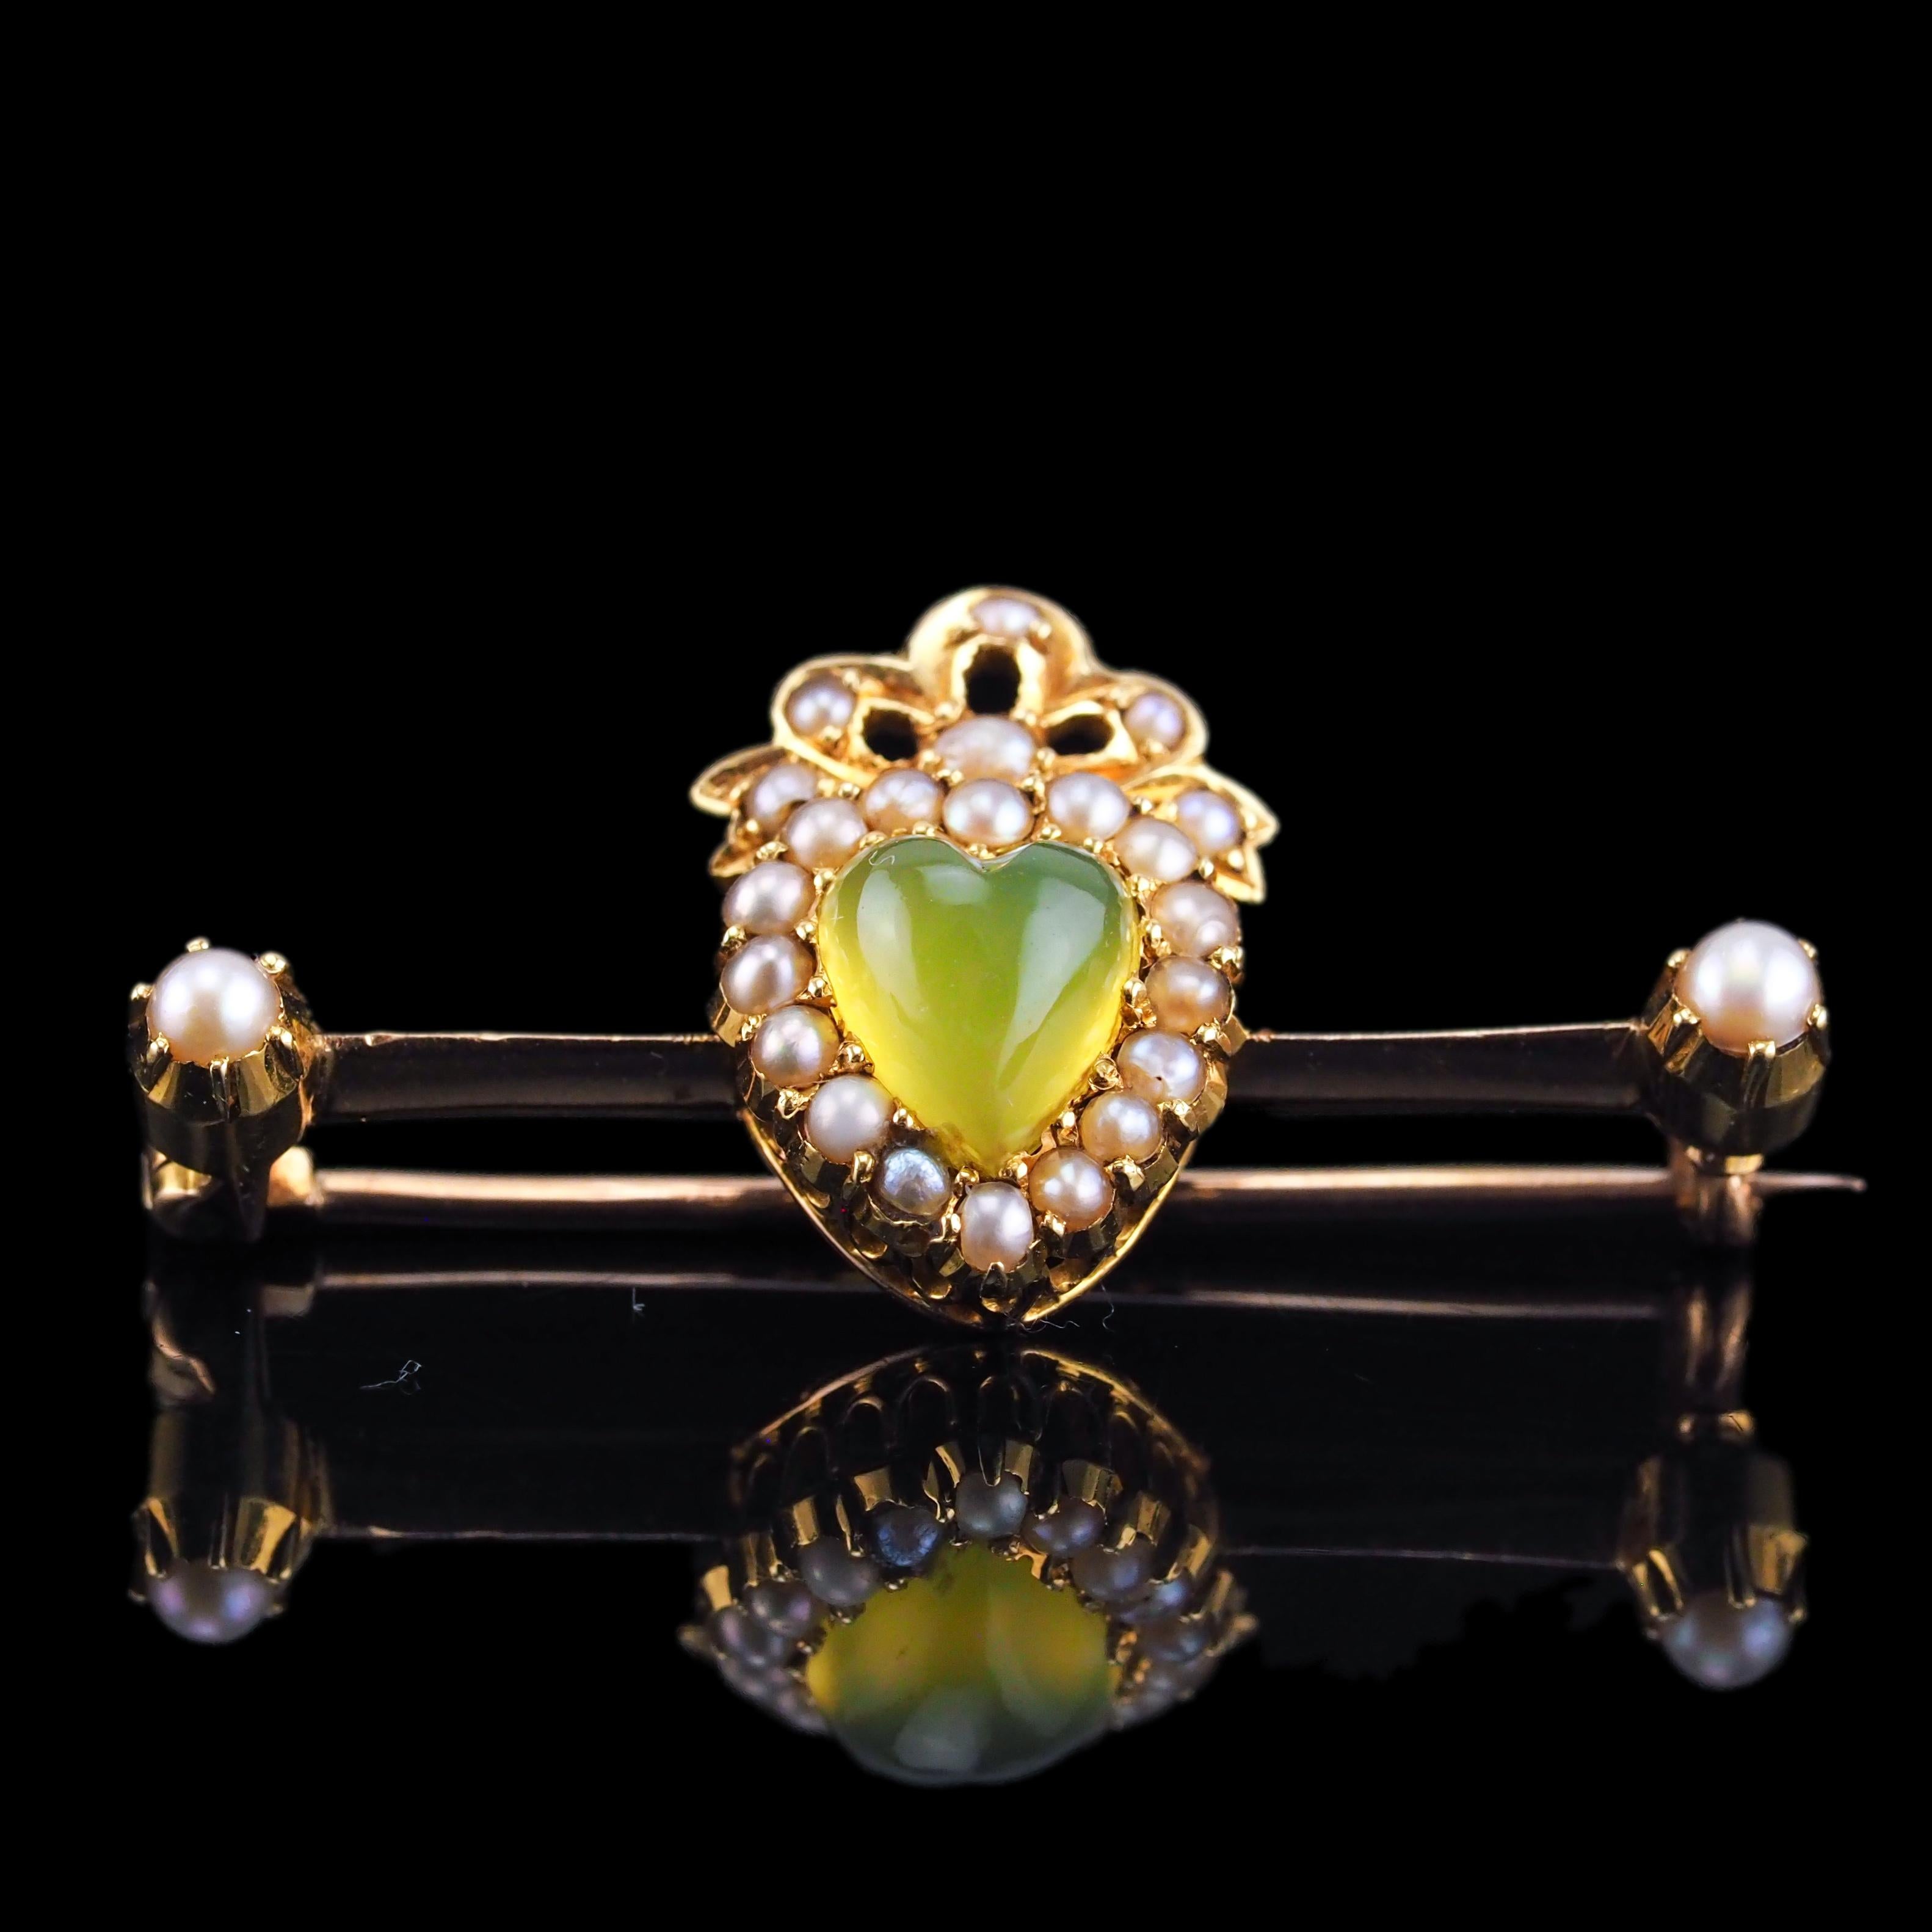 Antique Victorian Chalcedony Brooch  Seed Pearls 15K Gold Heart Shaped c.1890 For Sale 7